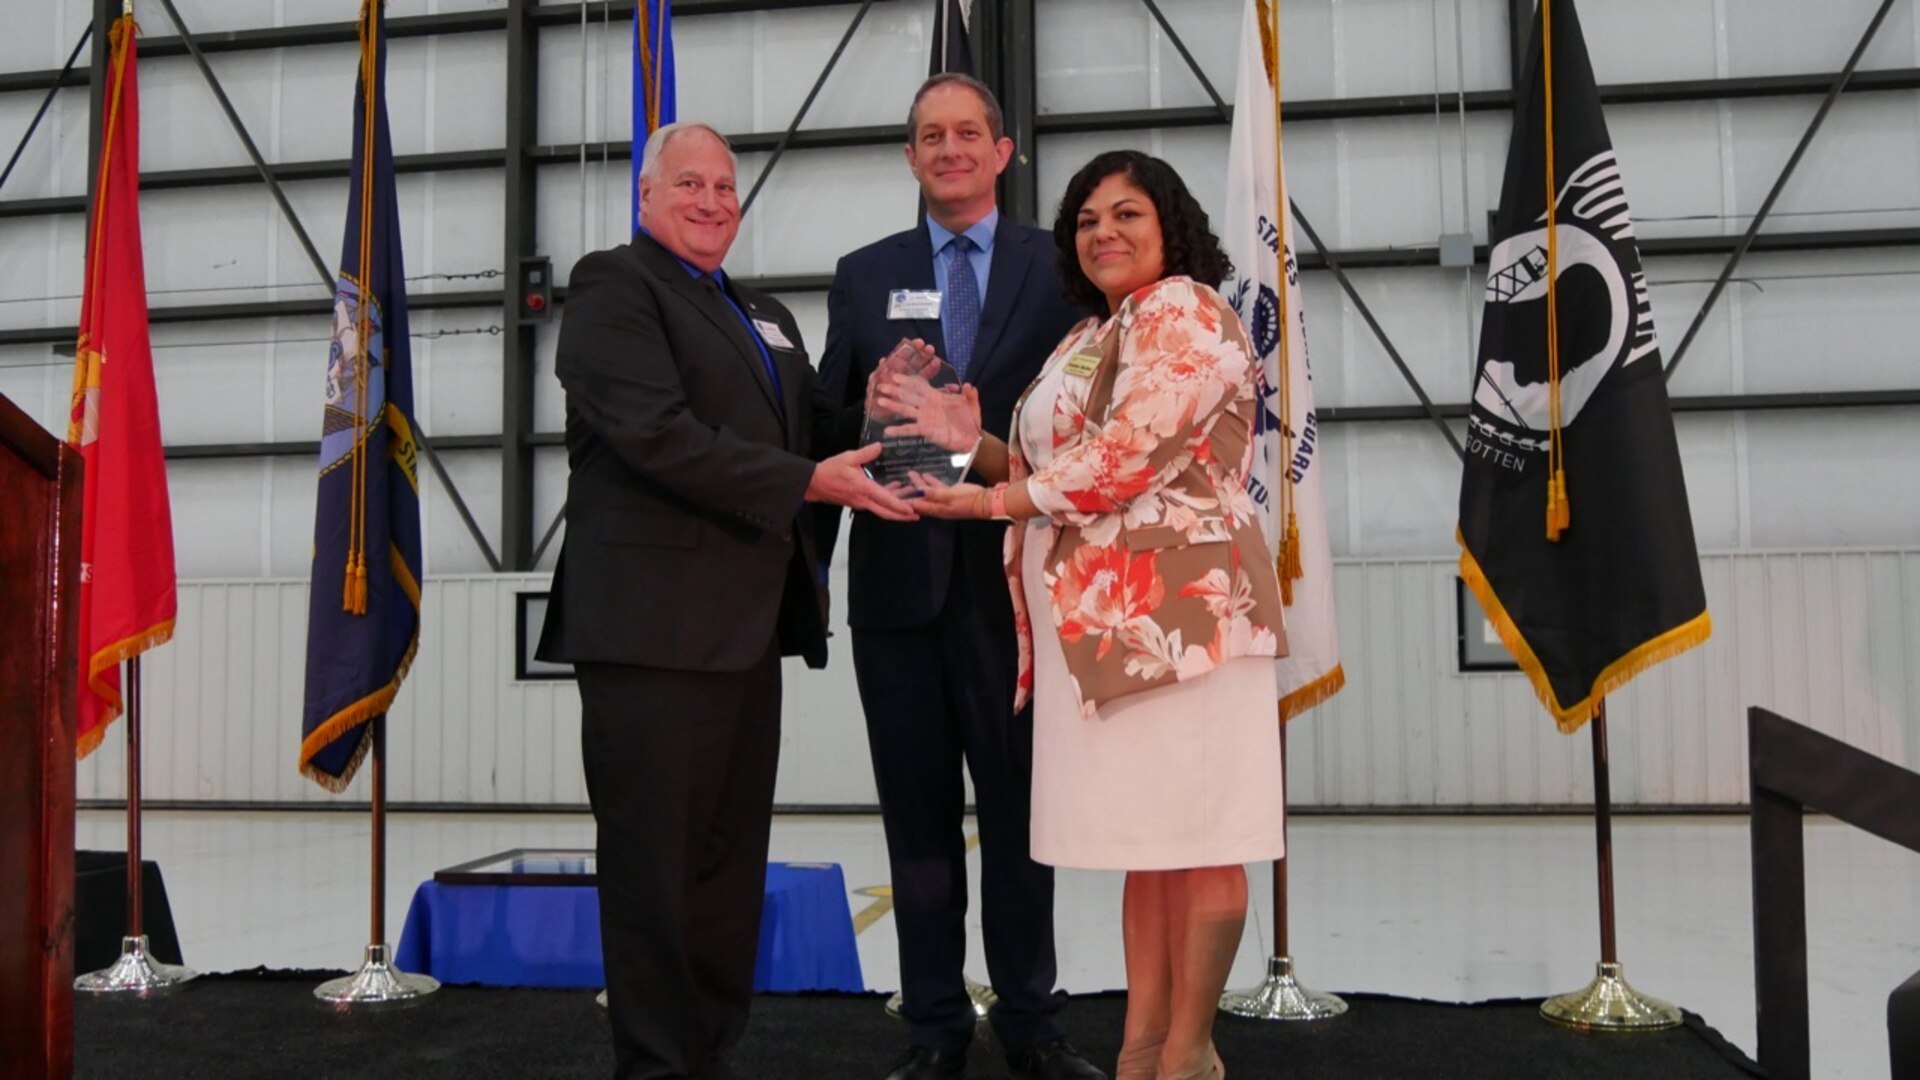 The Air Force Research Laboratory’s United States Air Force School of Aerospace Medicine (USAFSAM) was inducted into the San Antonio Aviation Hall of Fame during the Dee Howard Foundation’s 2022 San Antonio Aerospace Hall of Fame awards banquet held at the Boeing Hangar at Port San Antonio March 2, 2022. Accepting the honor on behalf of USAFSAM was retired Col. (Dr.) Charles R. Fisher Jr., who was joined by Jim Perschbach, President & CEO, Port San Antonio, and Christina Martinez, Executive Director, Dee Howard Foundation. (Courtesy photo)